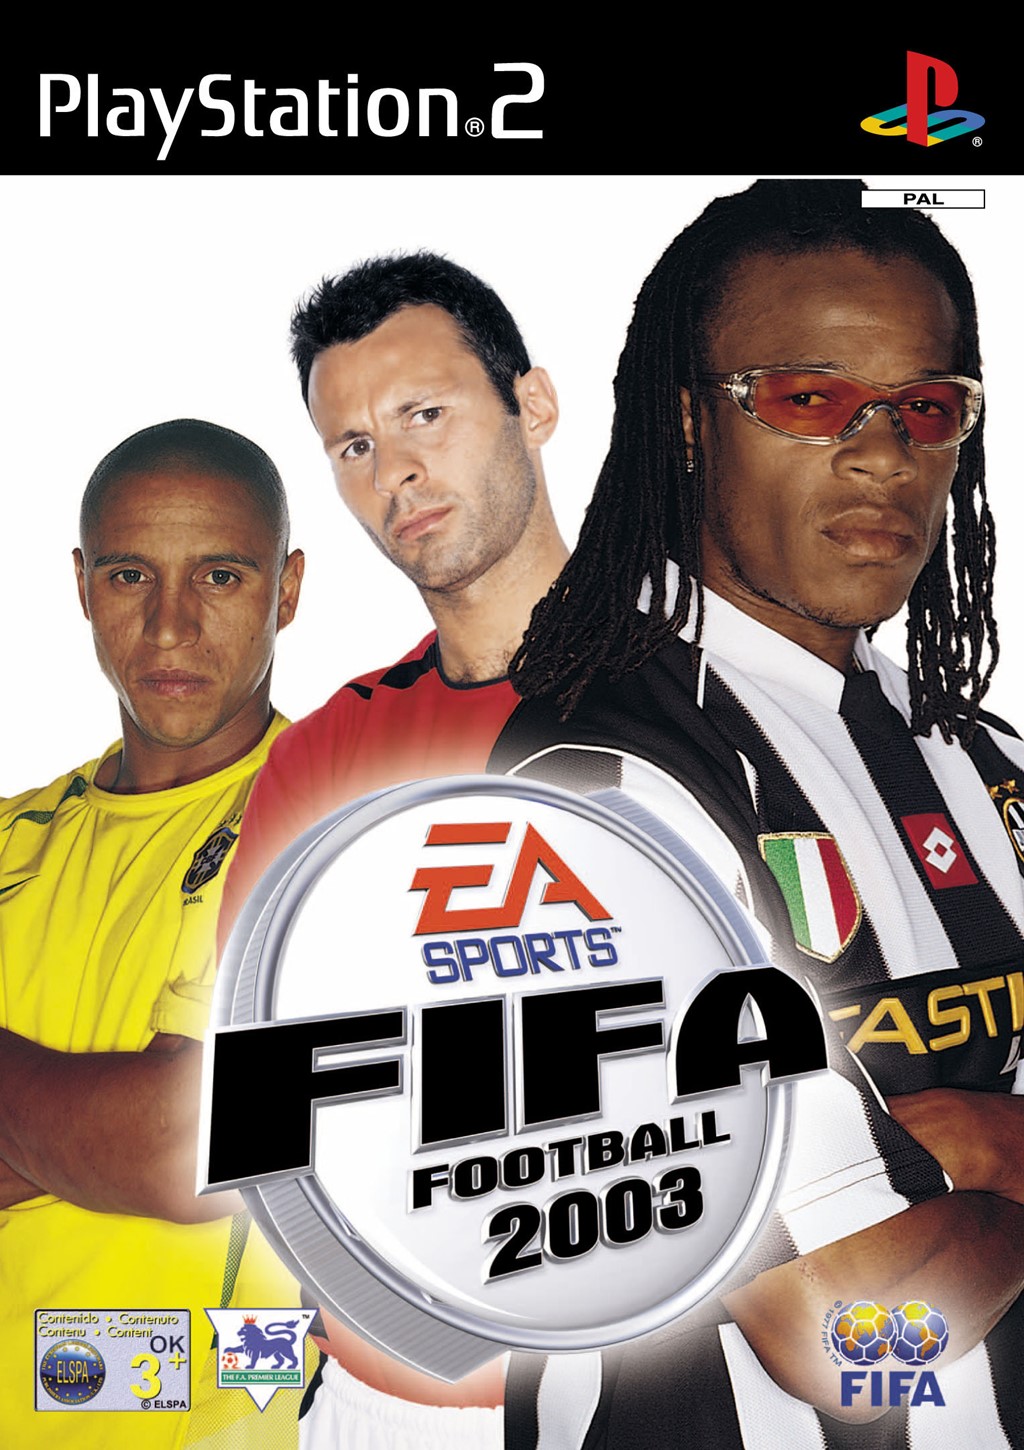 Every FIFA cover athlete